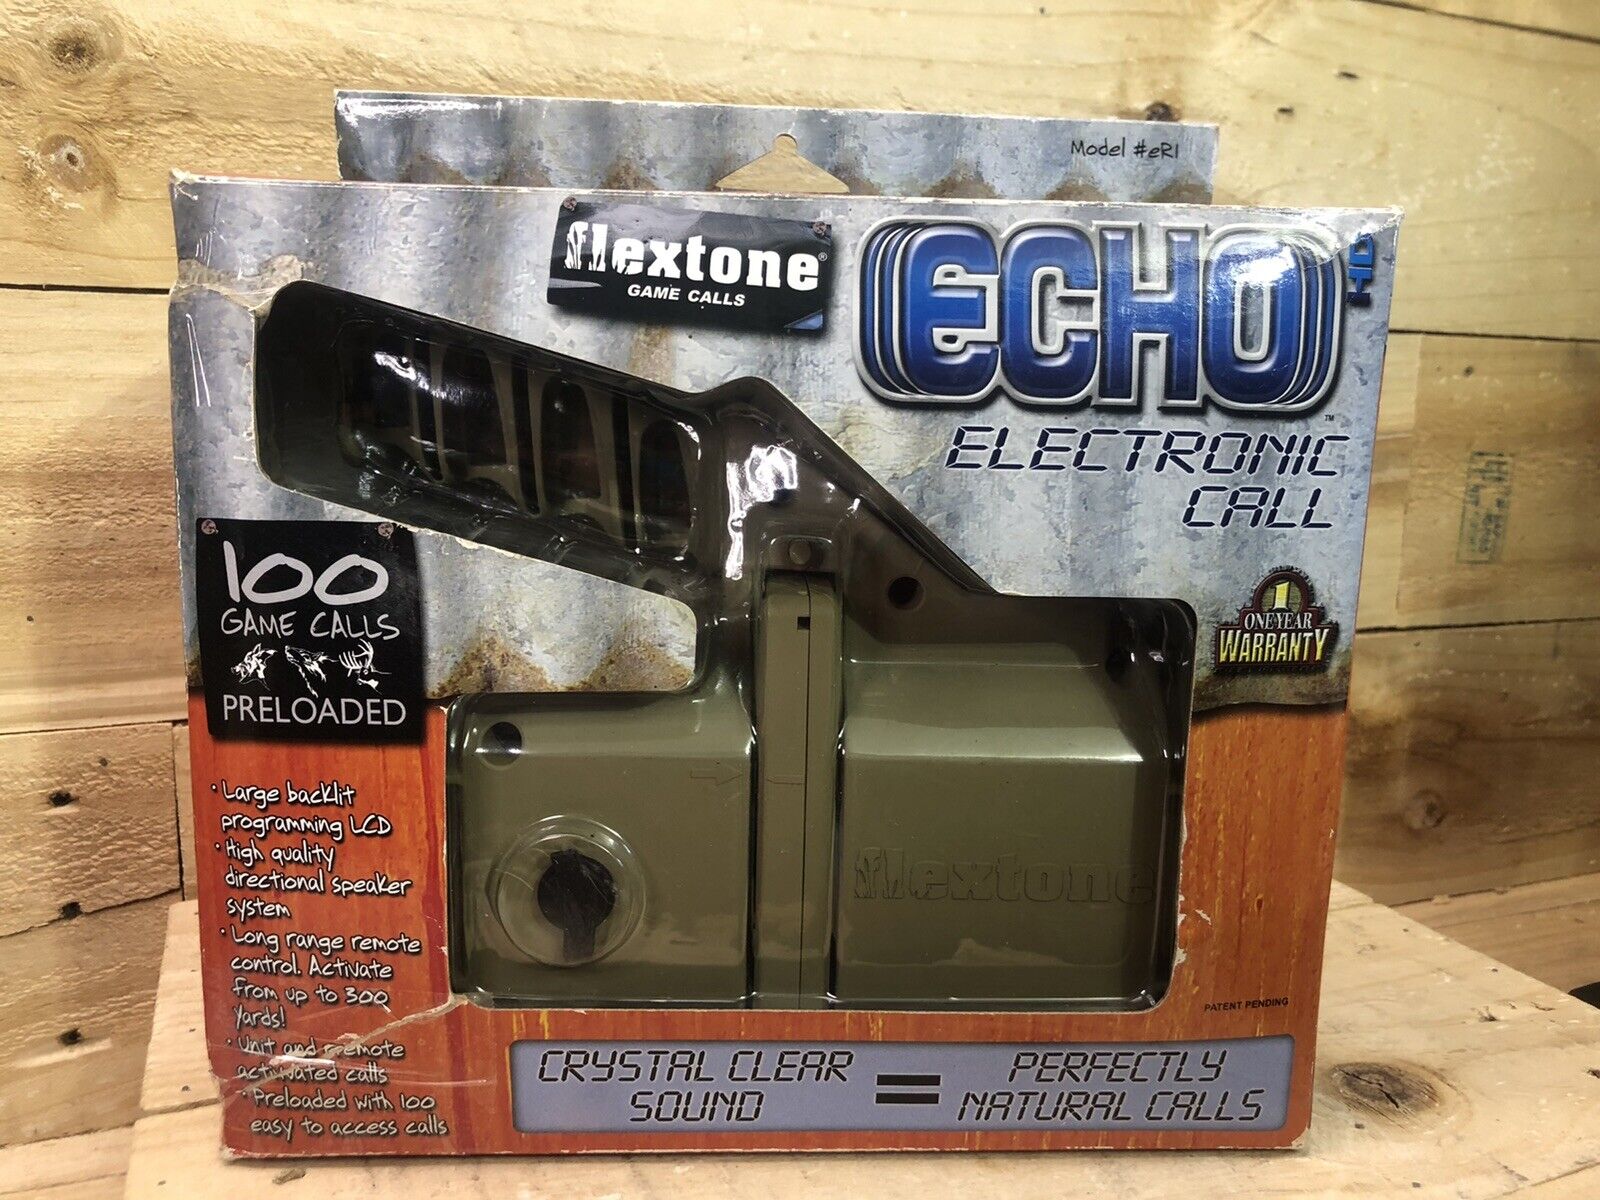 flextone Game Calls, ECHO Electronic call ￼model #eR1 “As Is” needs Batteries